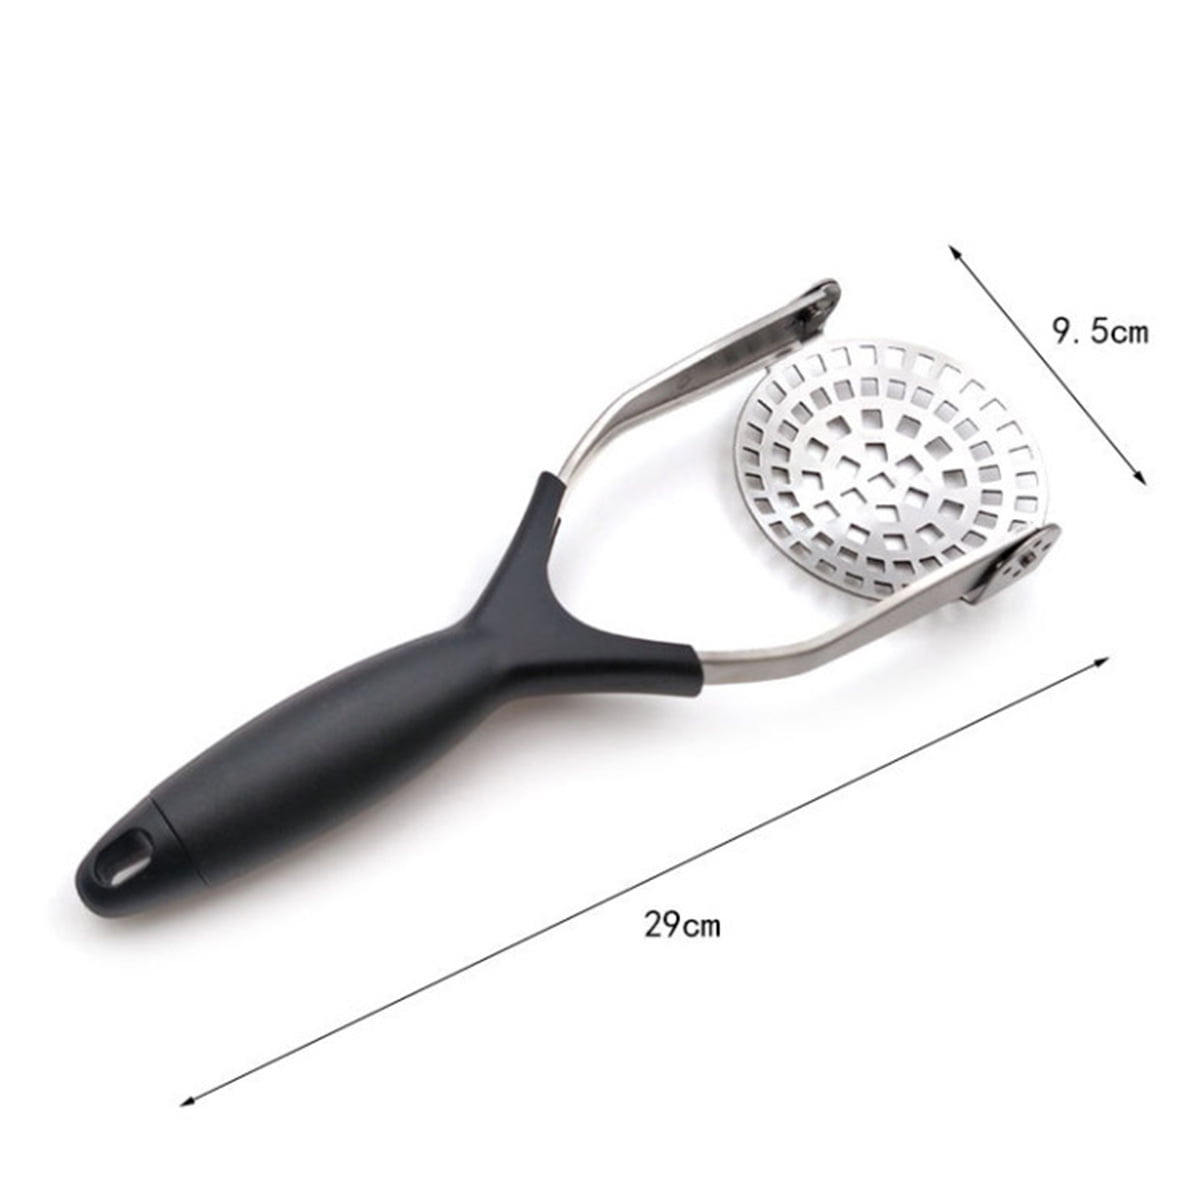 Stainless Steel Potato Masher Kitchen Tool(AUGMENTED MODEL) - Ergonomic  Design, Sturdy Construction, Long & Comfortable Grip - Manual Masher by  MEAARTEM